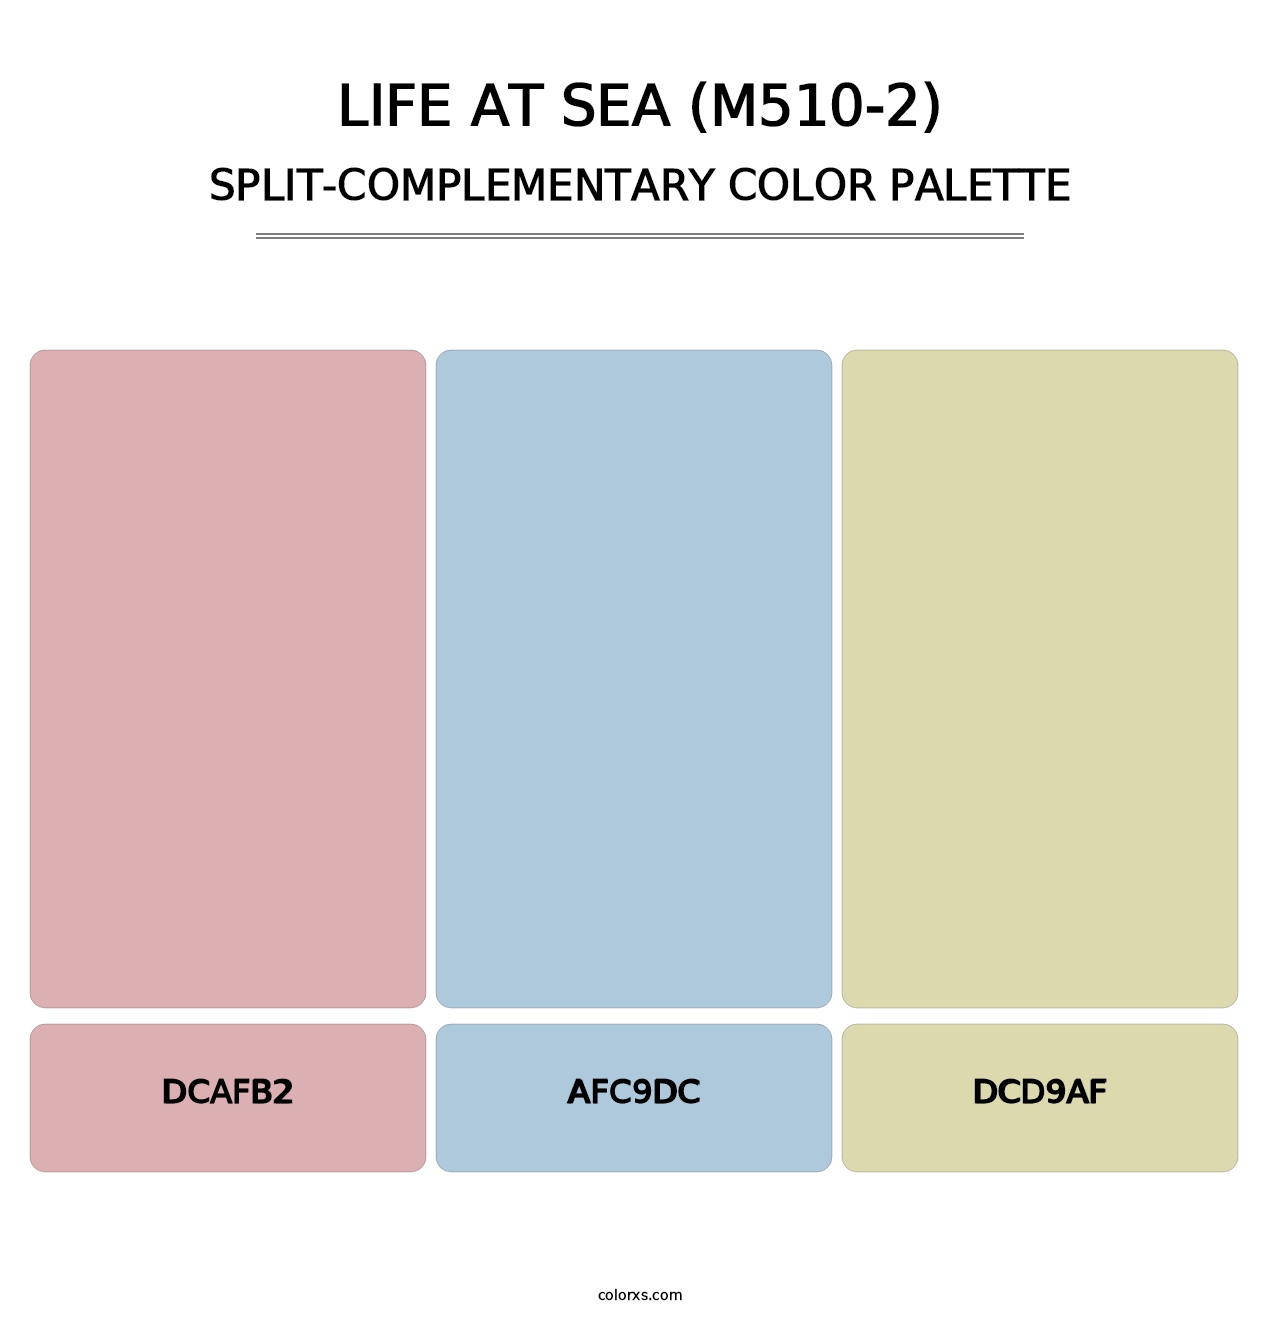 Life At Sea (M510-2) - Split-Complementary Color Palette